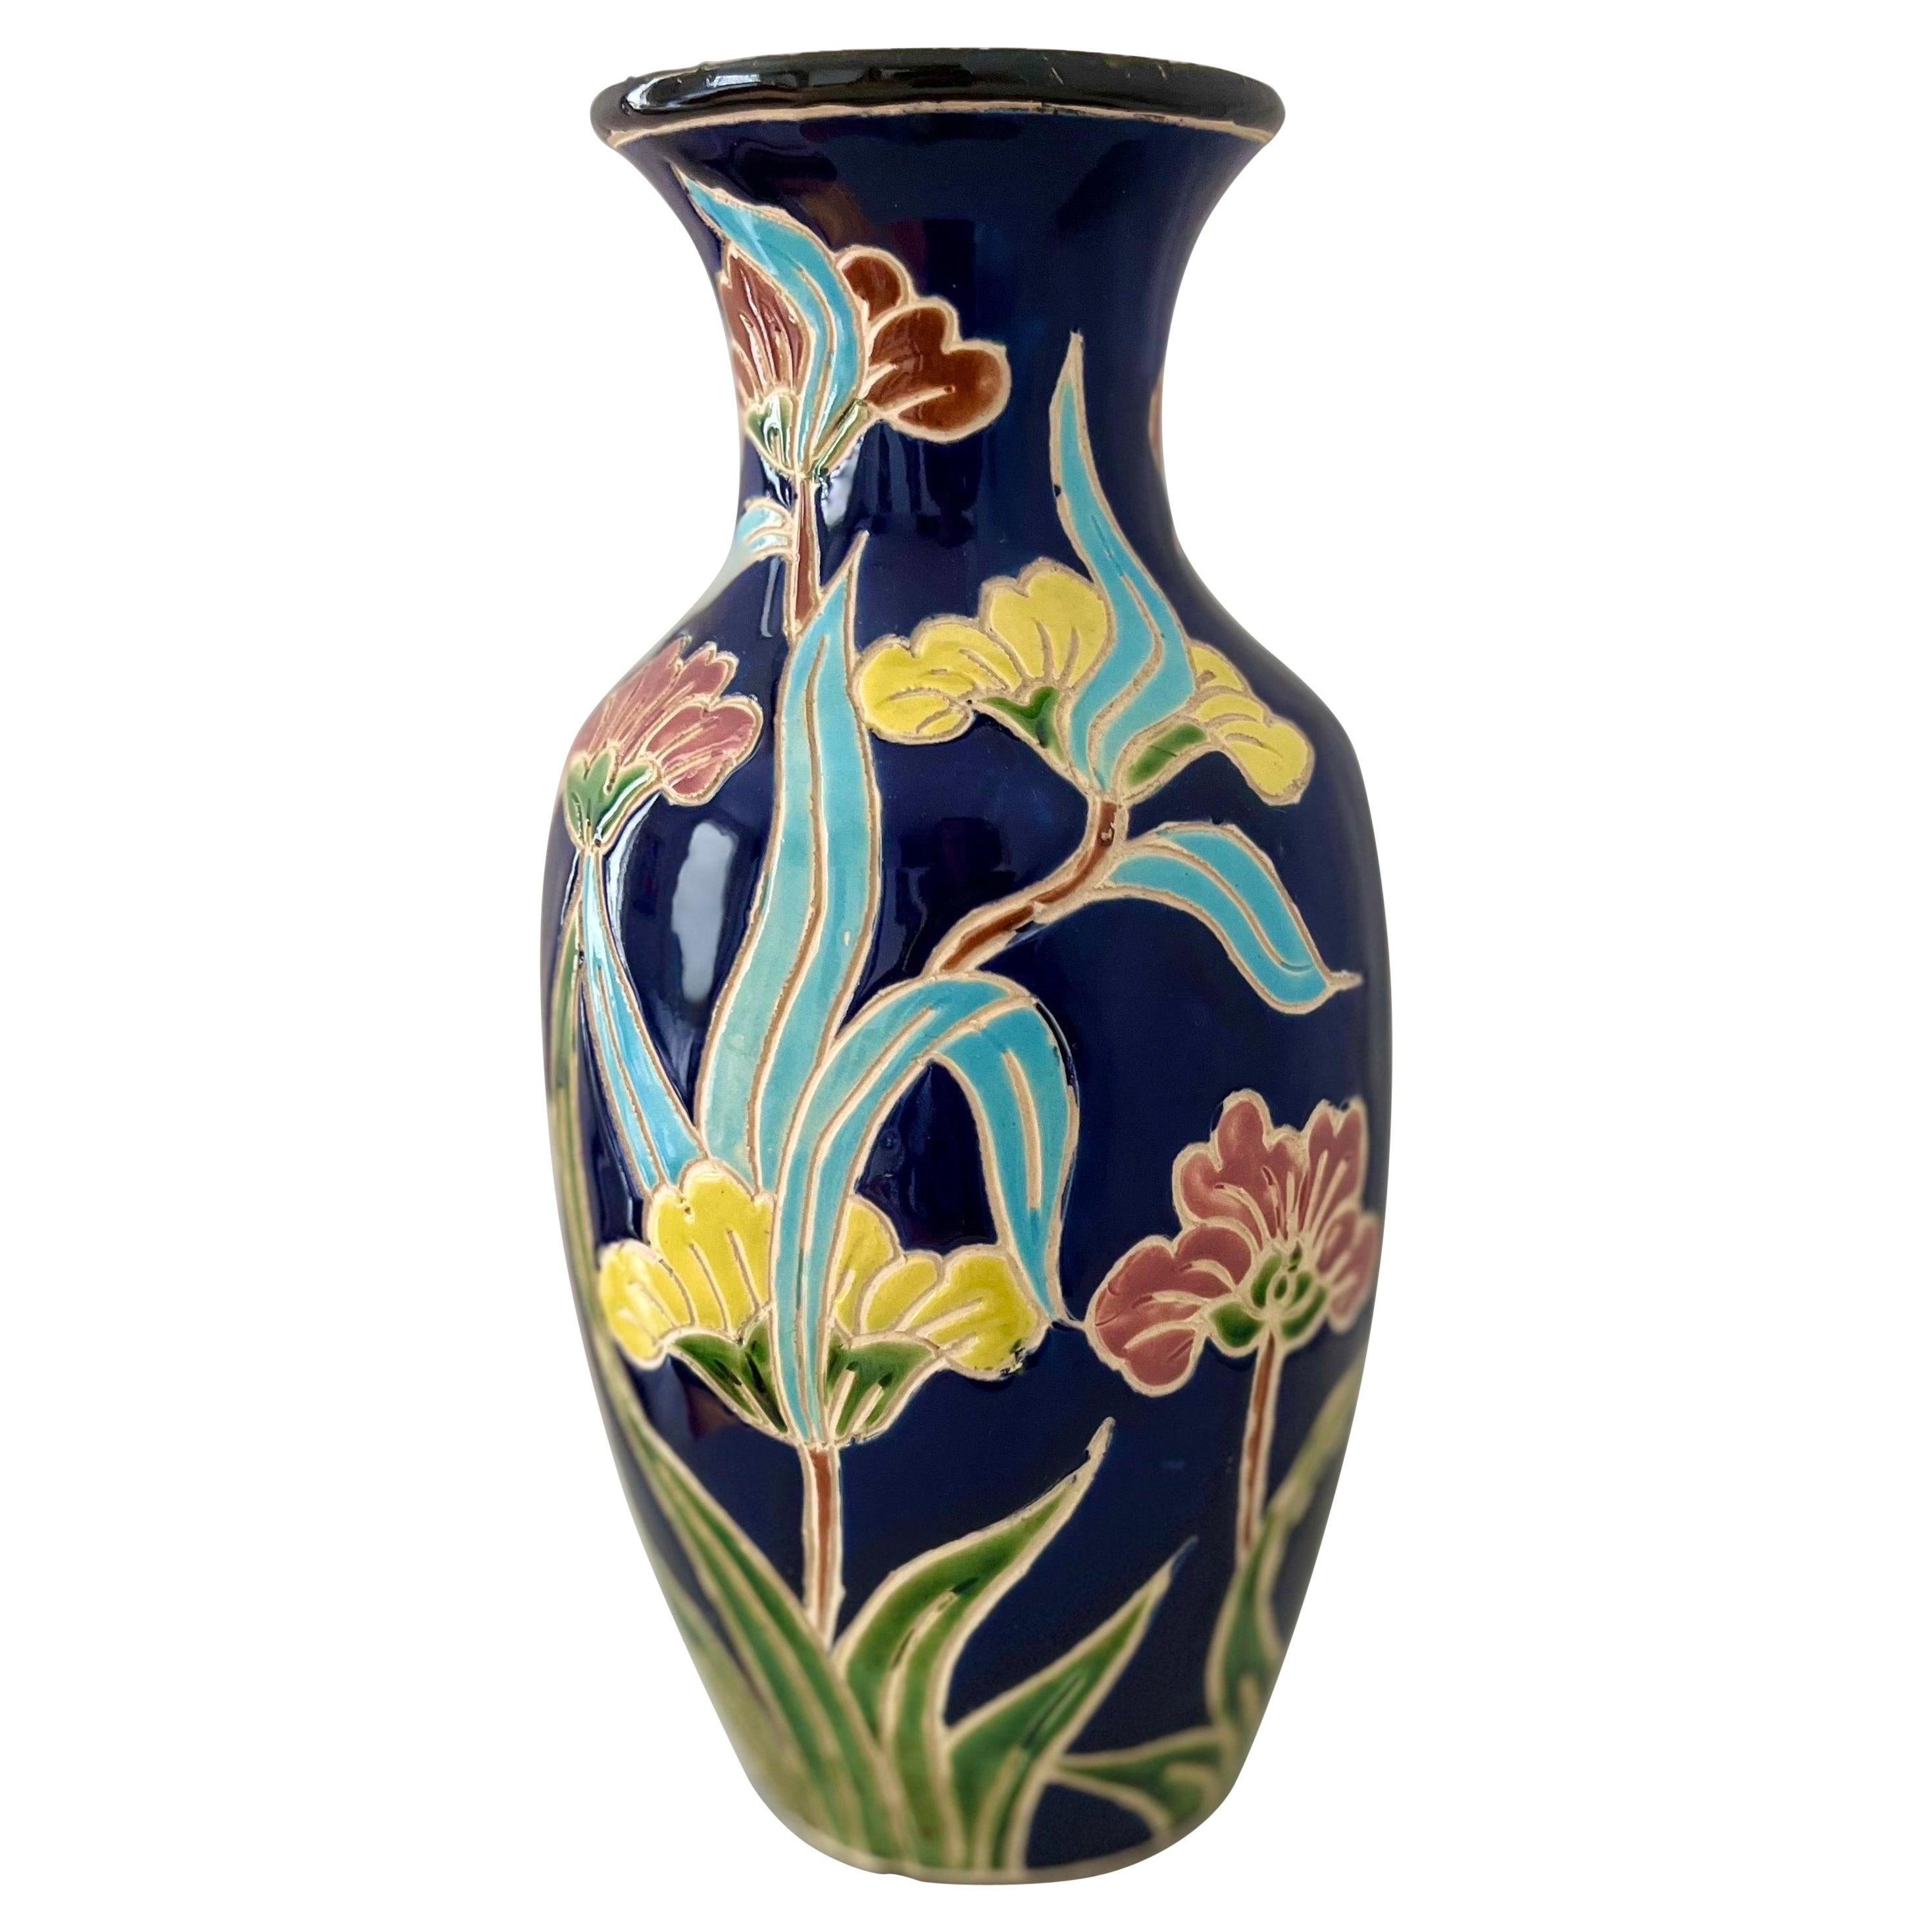 1960s/1970s Scandinavian Organic Modern Ceramic Vase with Colorful Floral Motifs For Sale